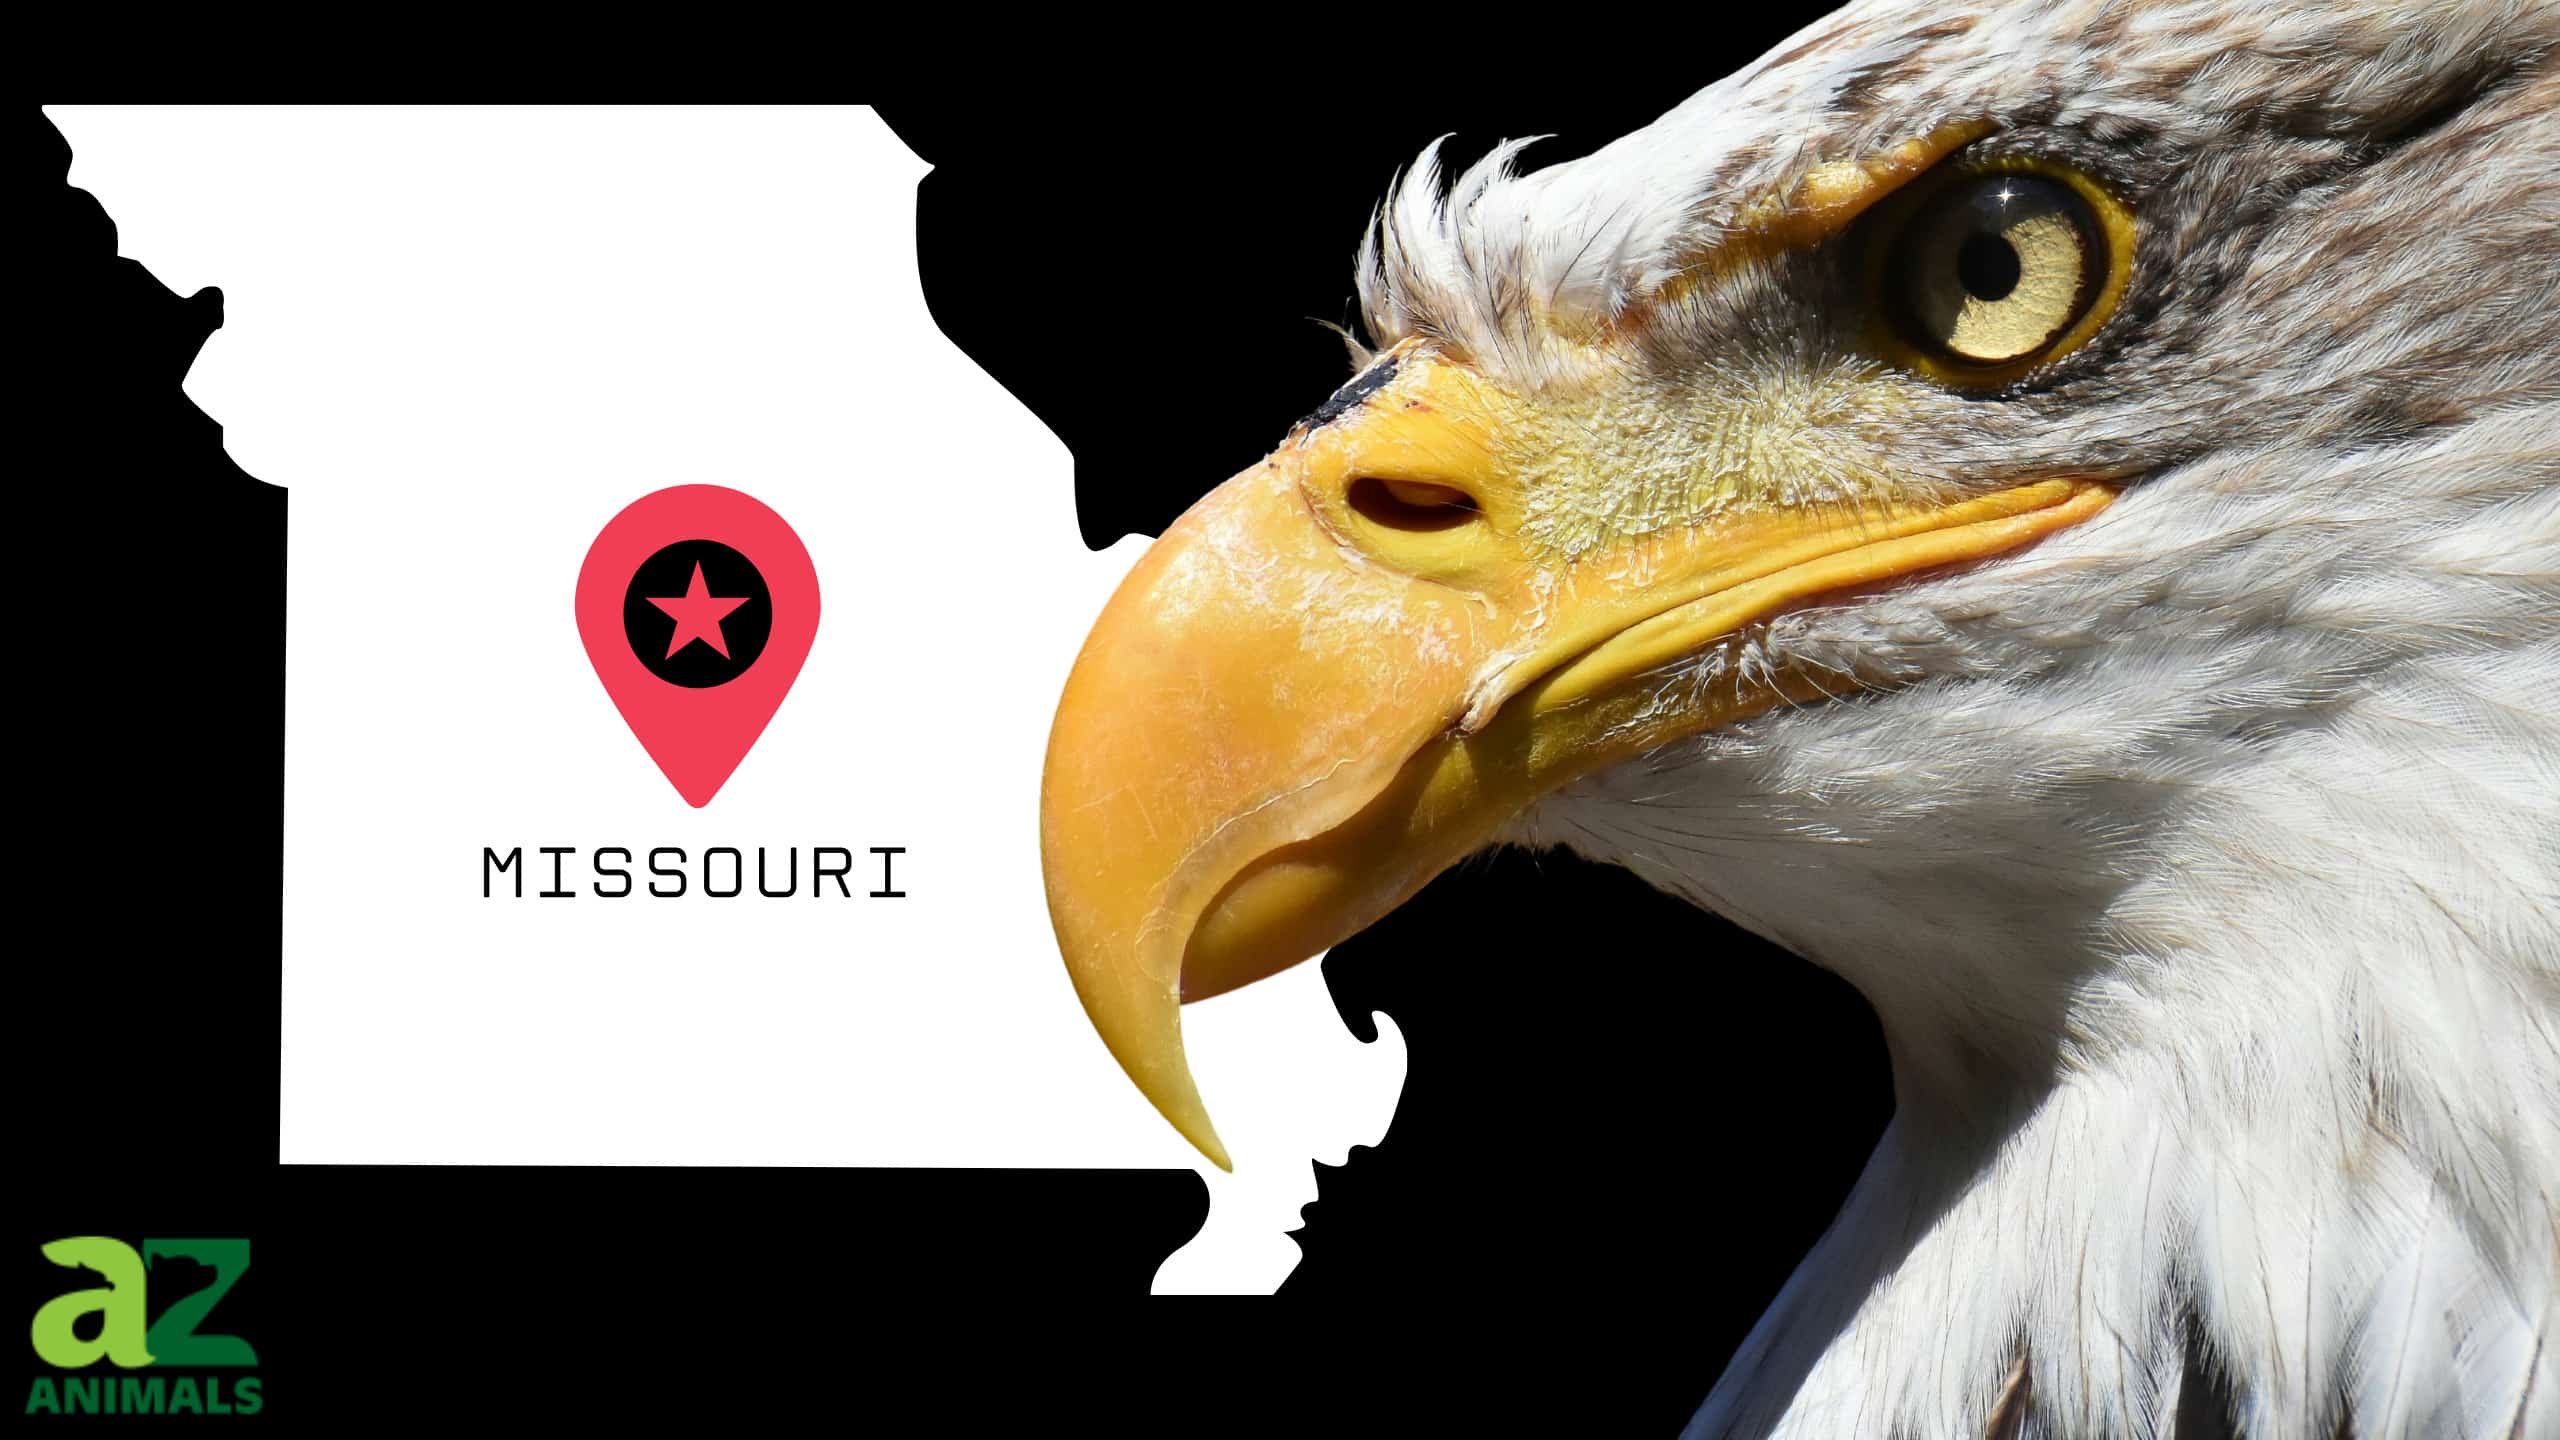 STL is the perfect area to spot bald eagles